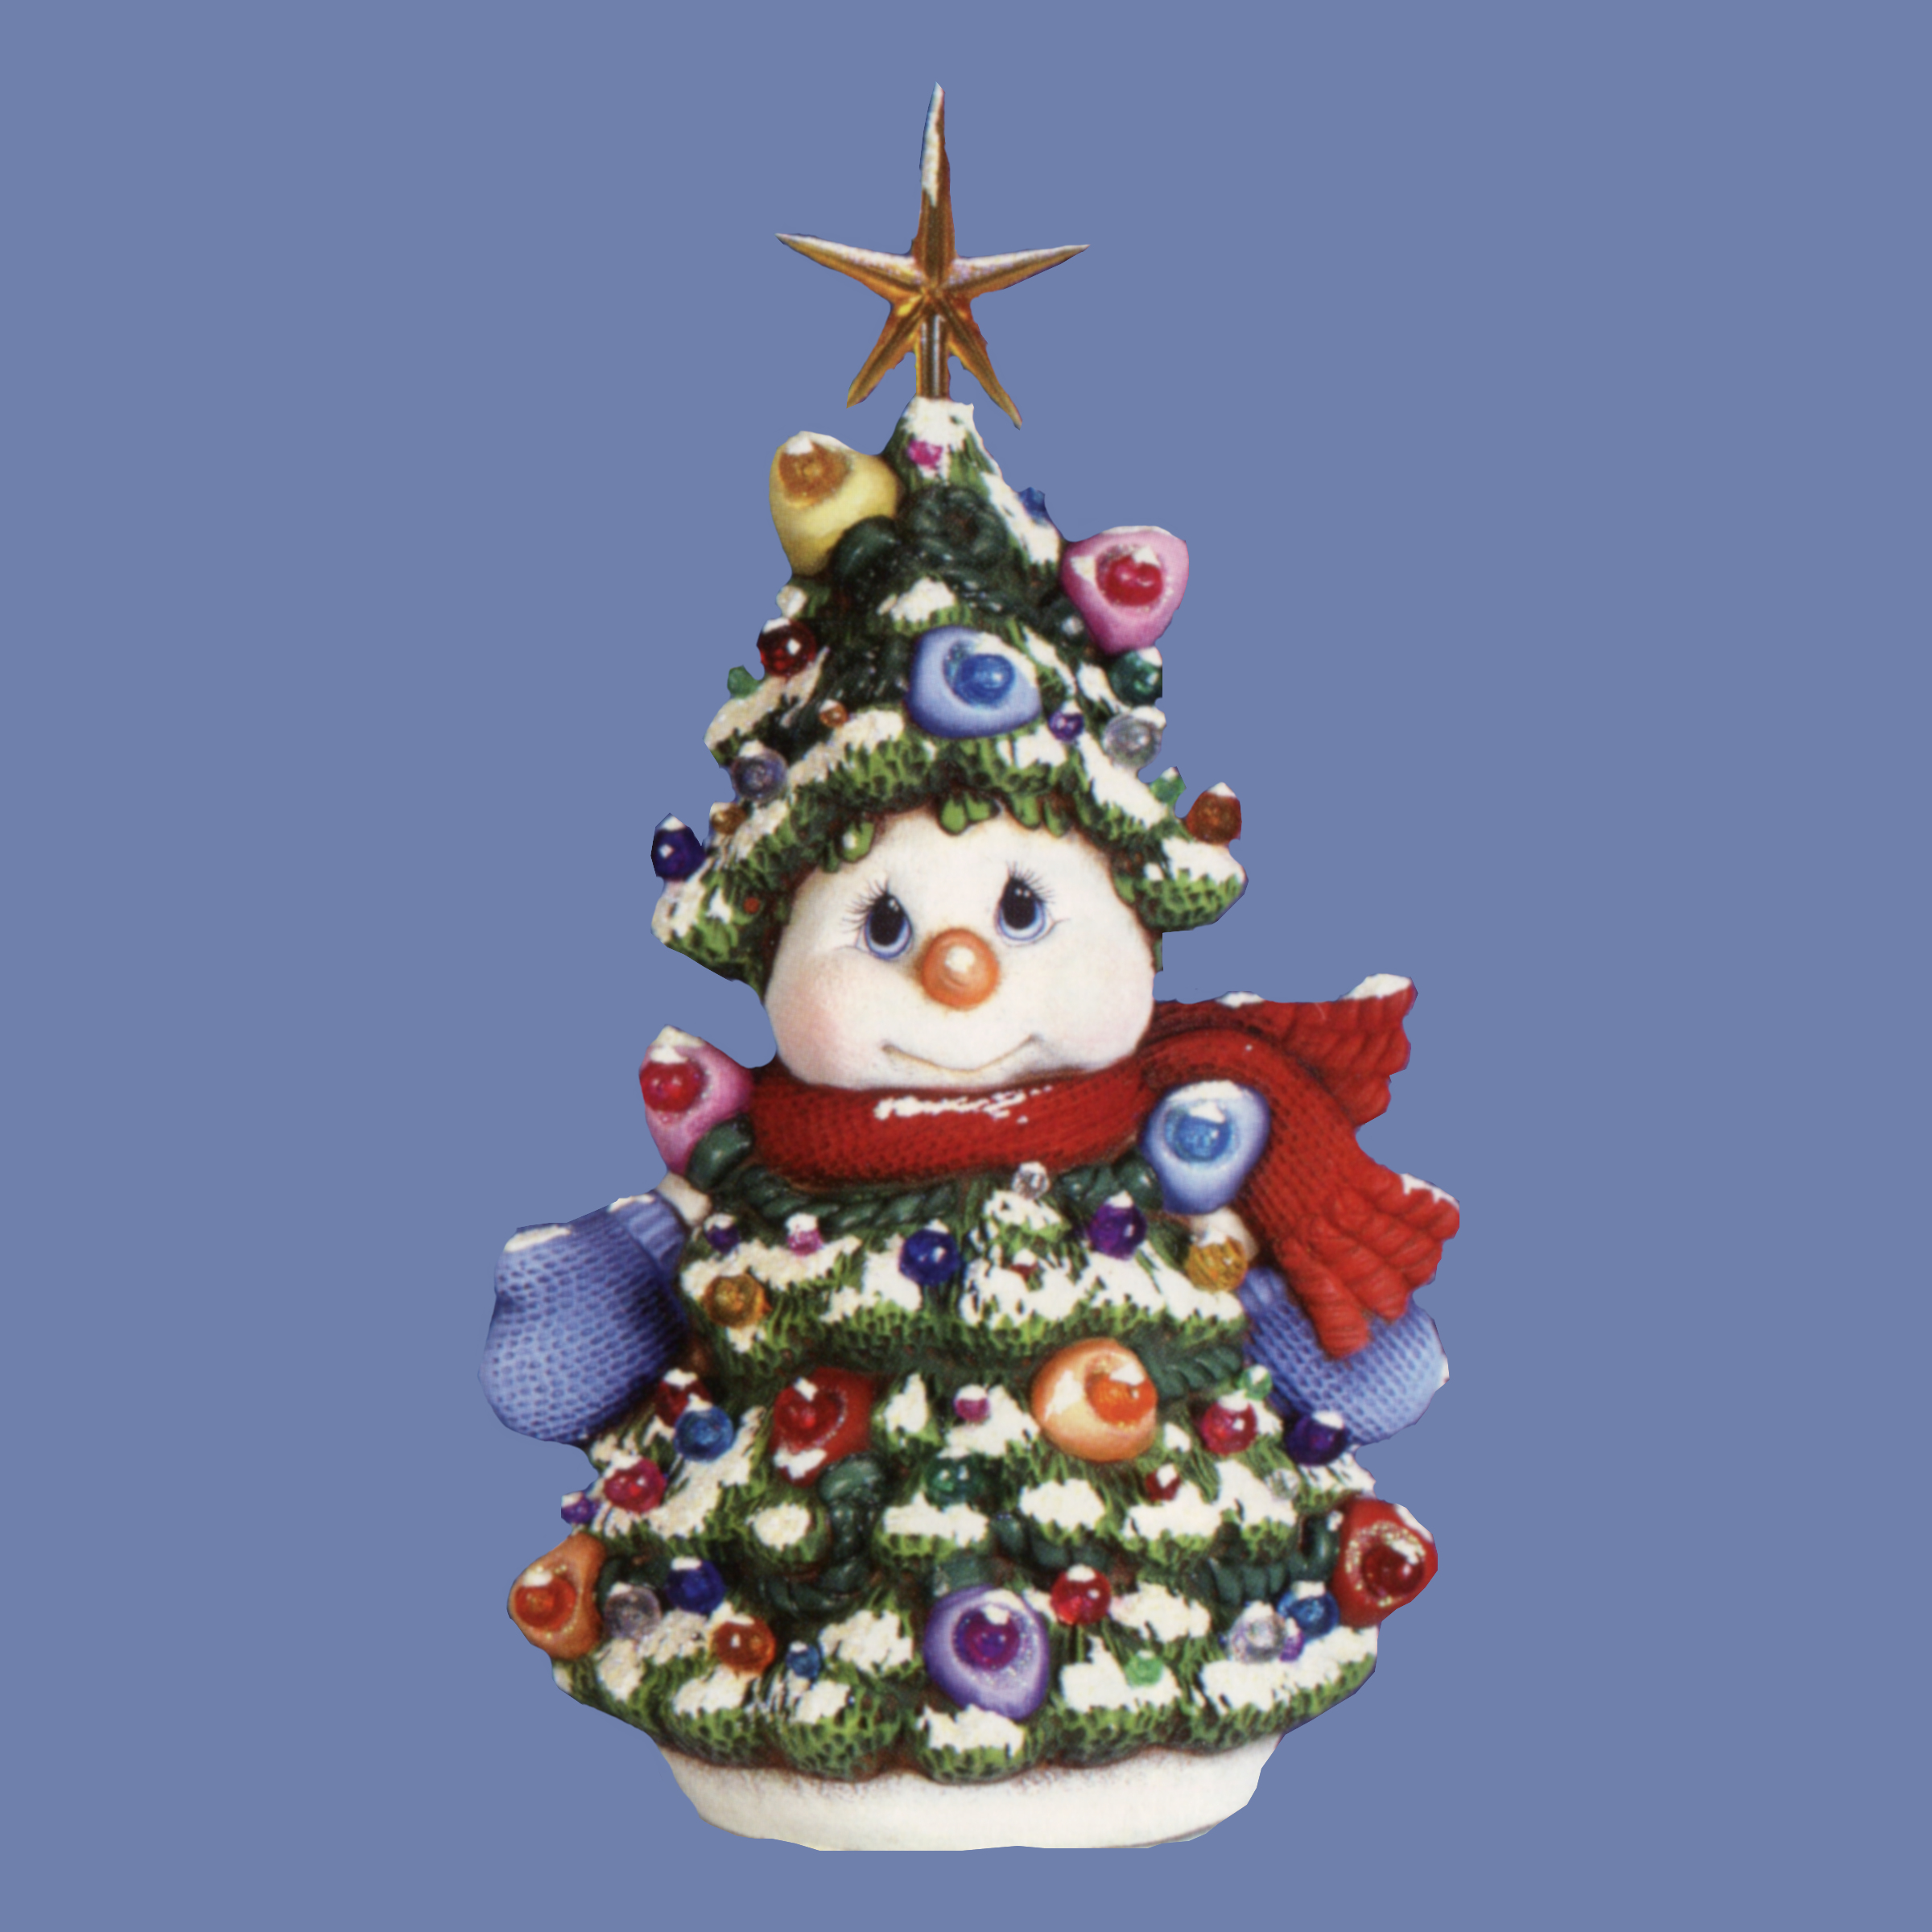 CWC Cook With Color Holiday Christmas Tree Ornament Ice Mold NEW